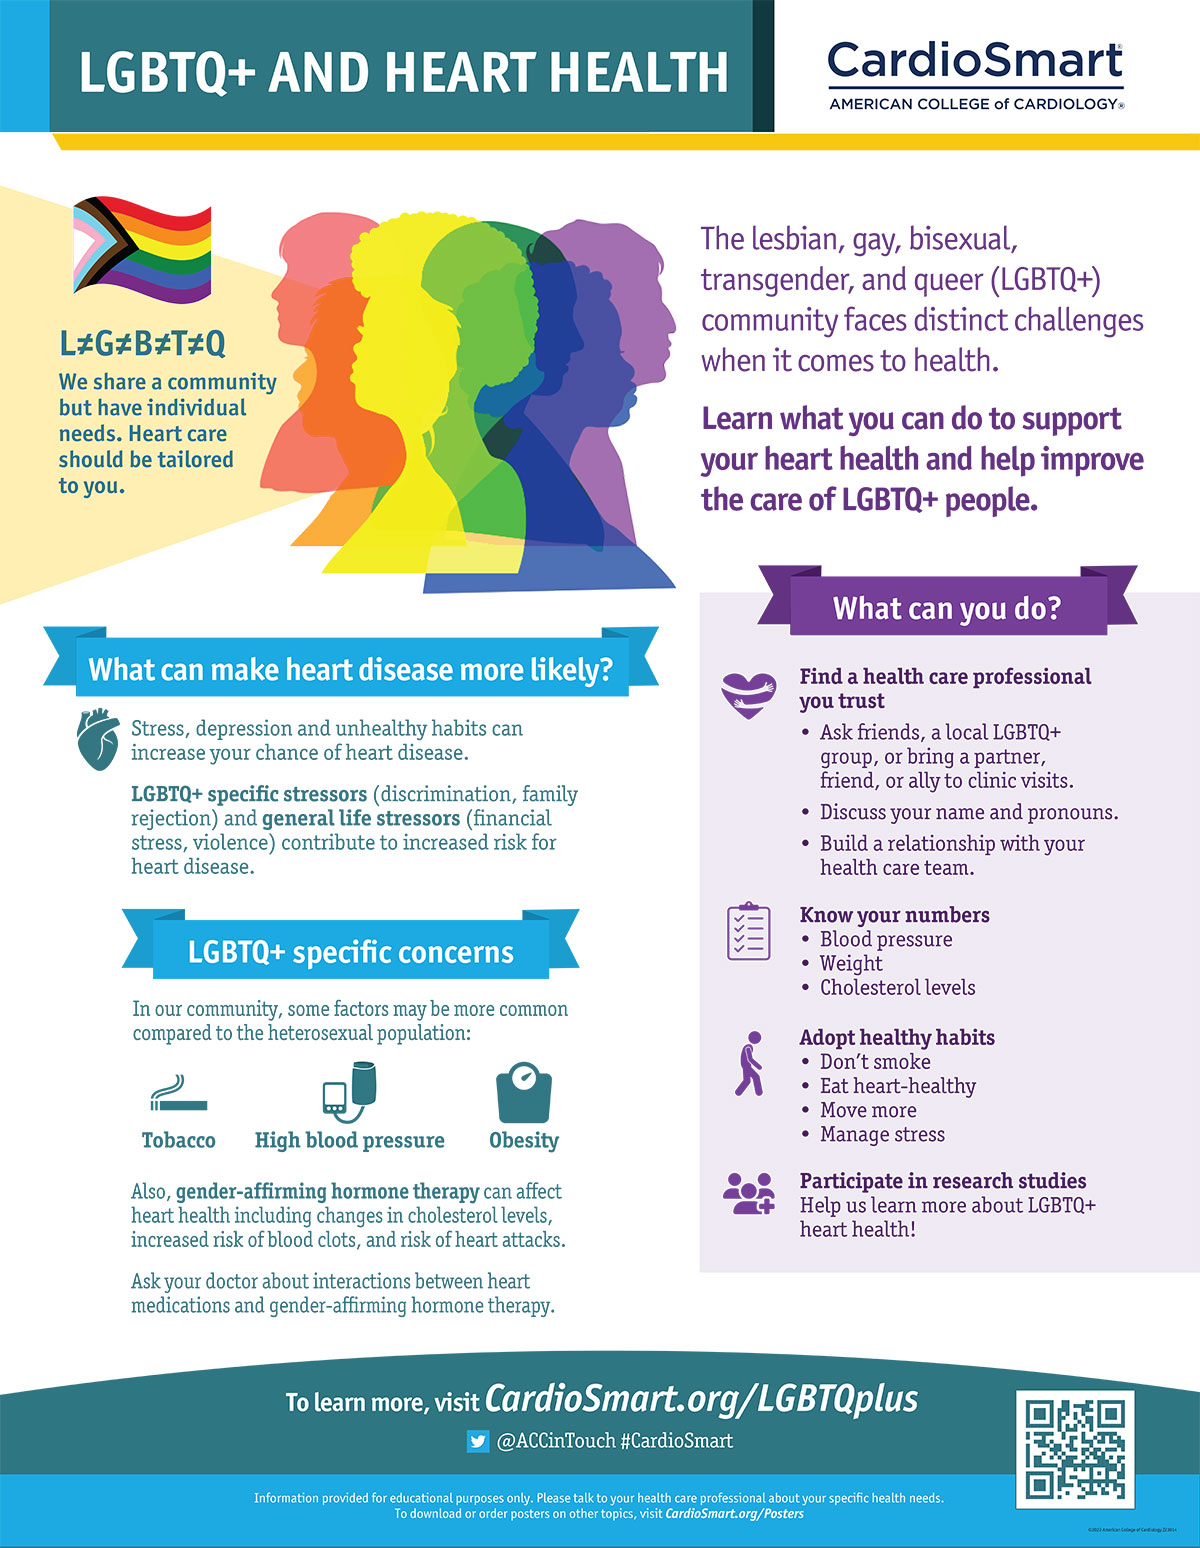 Improving Heart Health For LGBTQ+ Patients